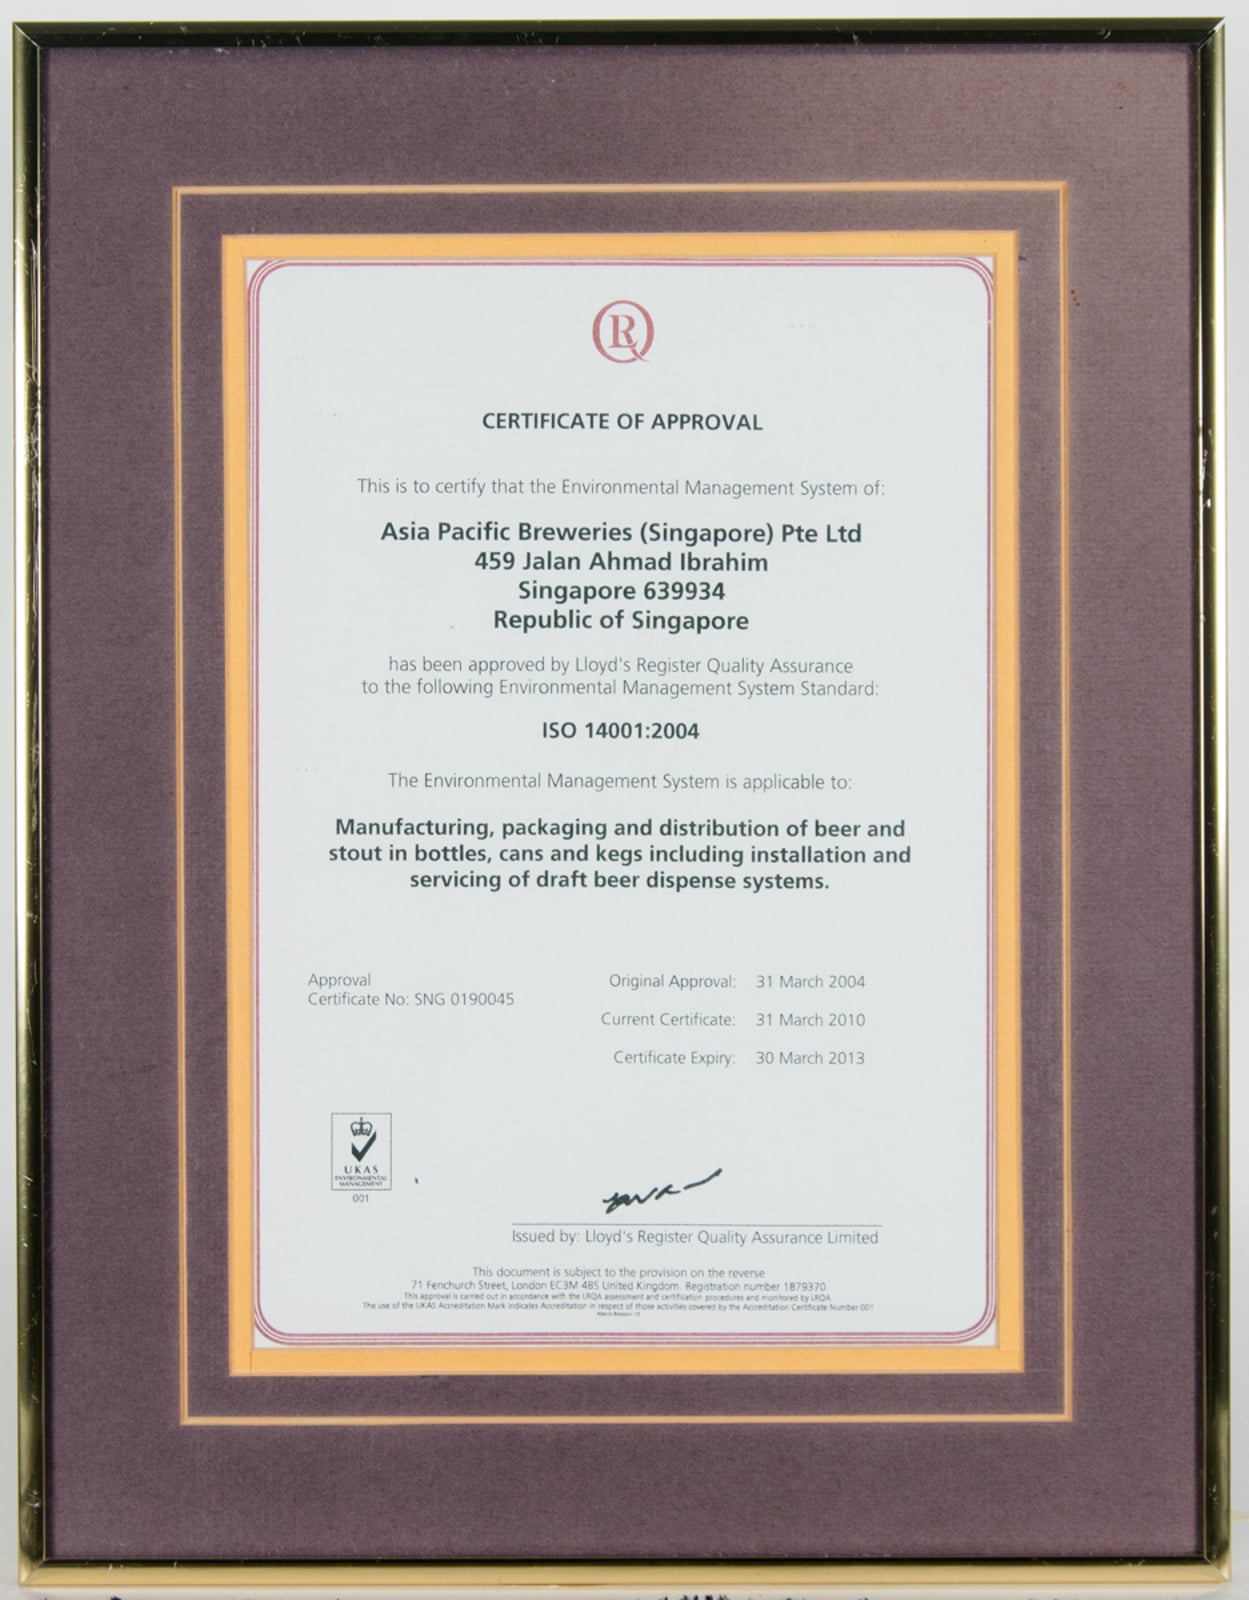 APBS ISO 14001:2004 Certificate of Approval from Lloyd's Register Quality Assurance Limited